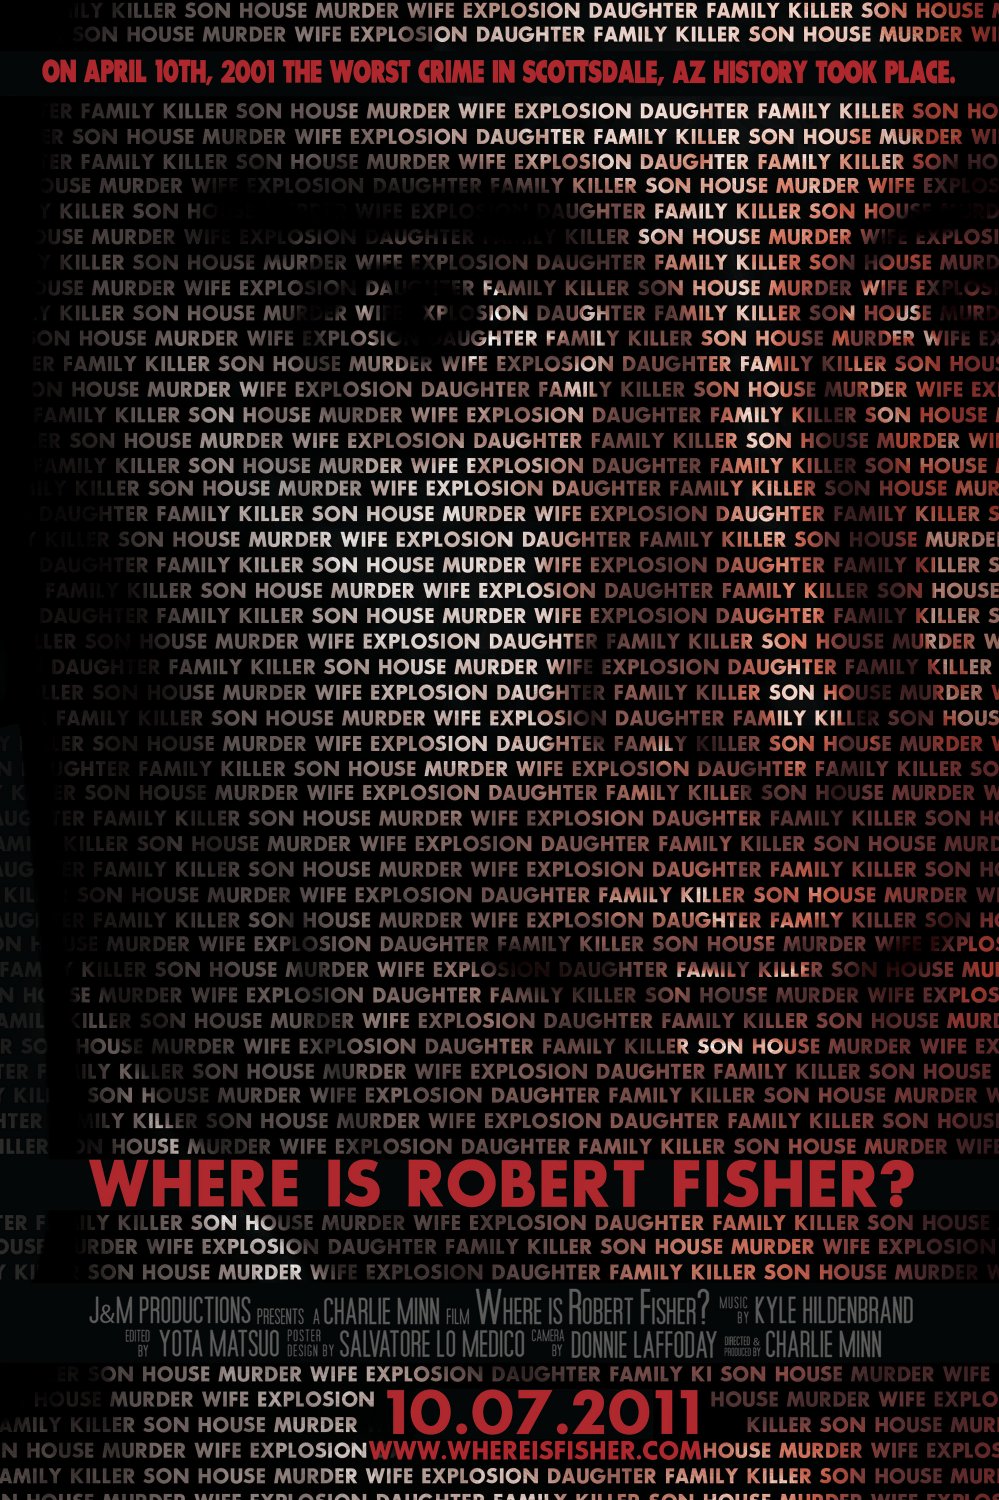 Extra Large Movie Poster Image for Where is Robert Fisher? (#2 of 2)